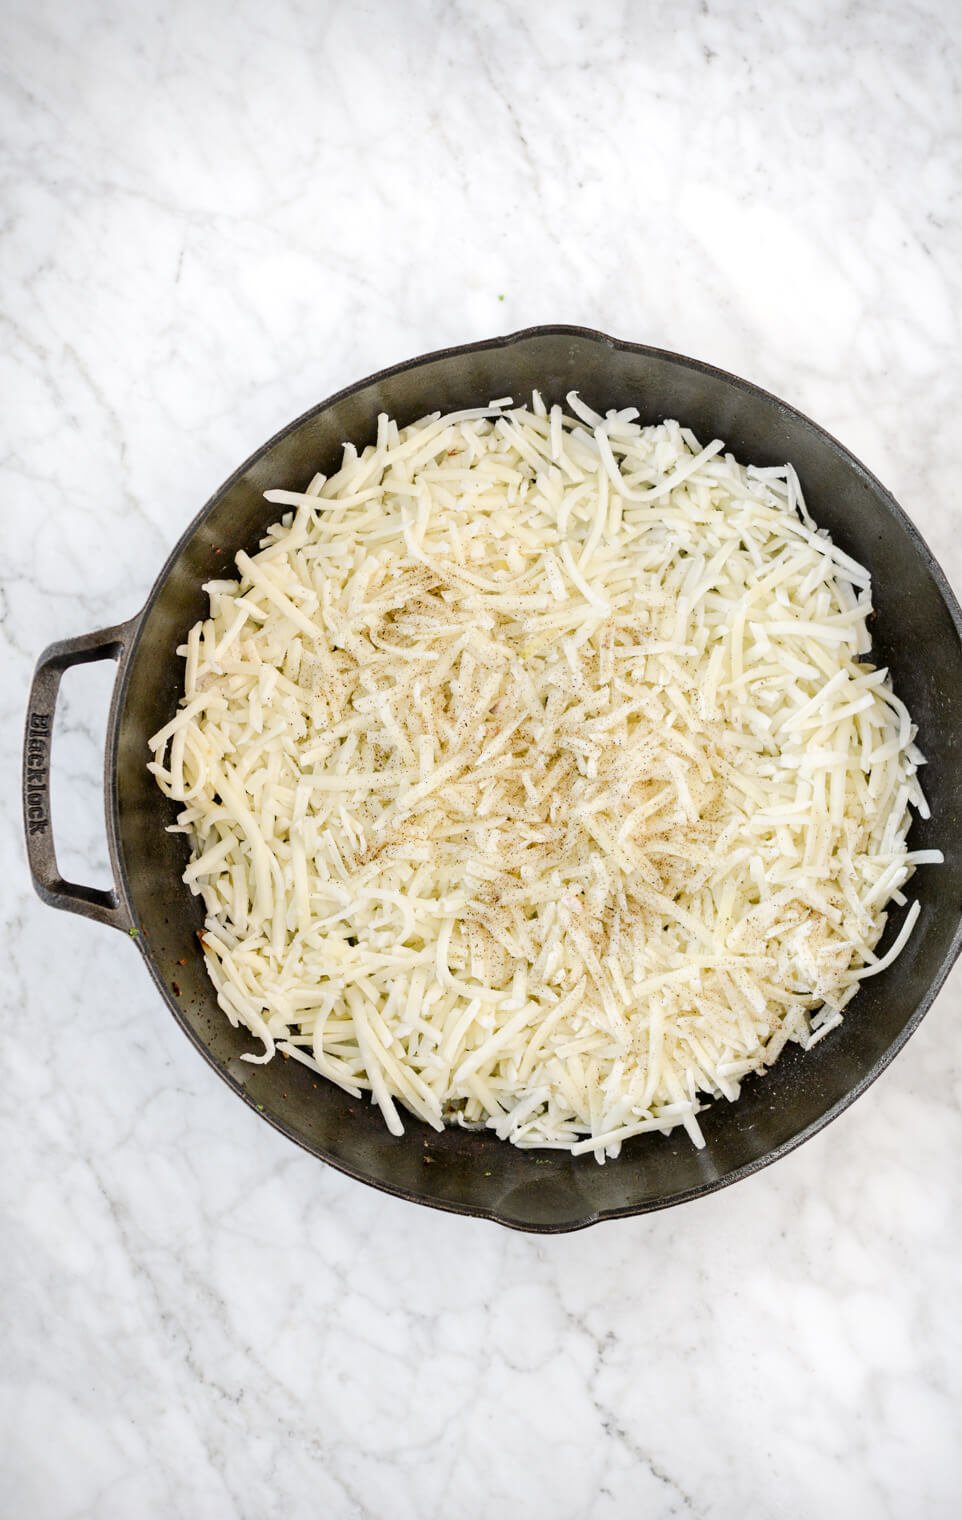 Hash browns spread across the bottom of a cast iron skillet.